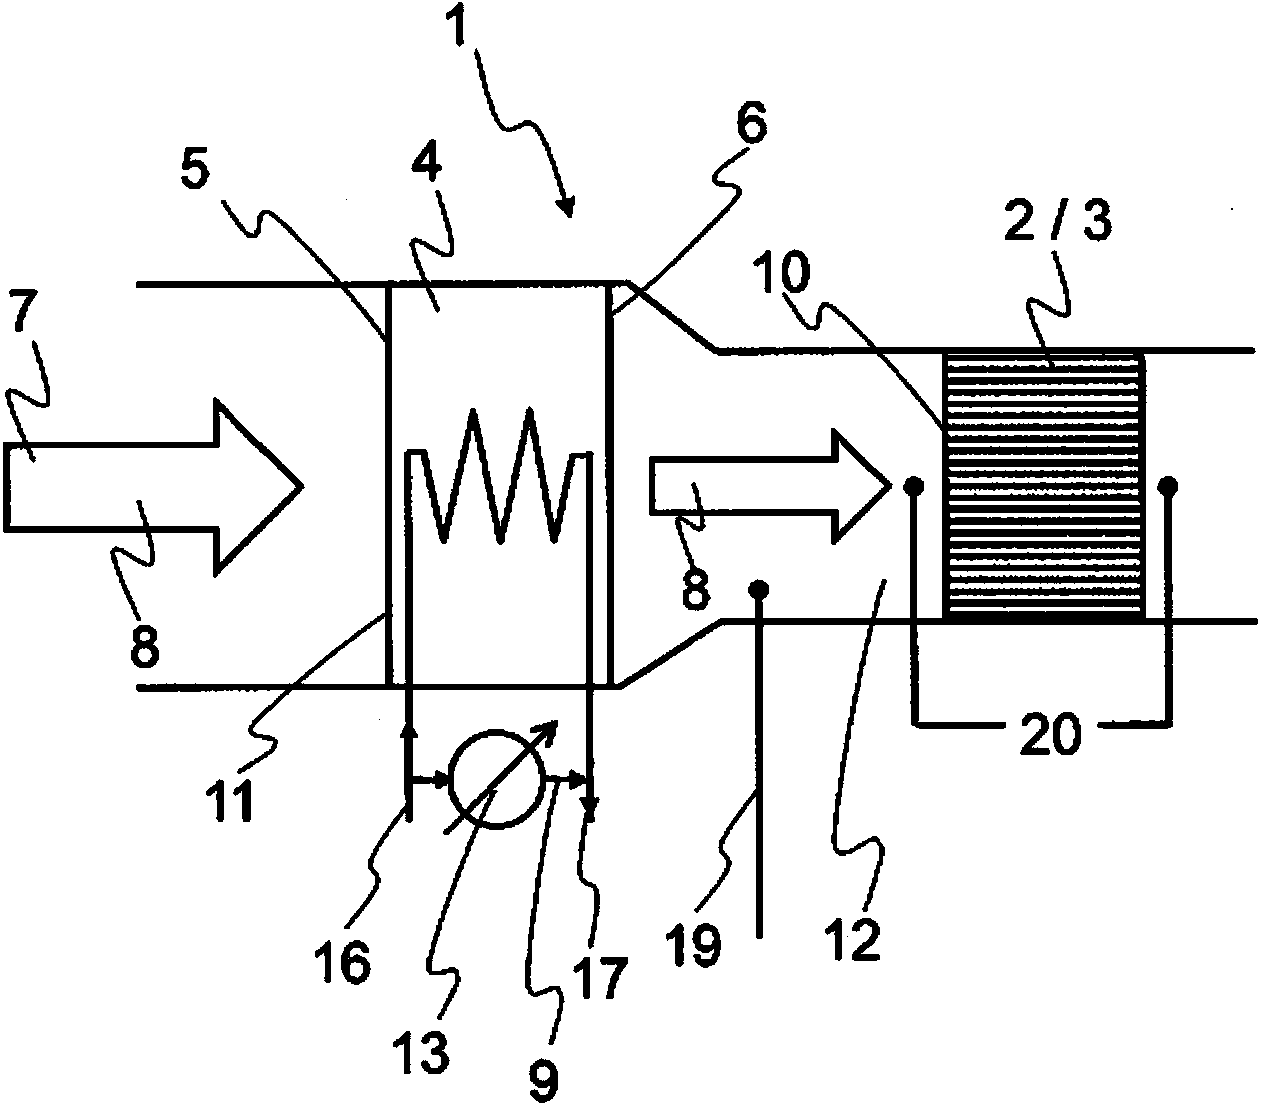 Exhaust emission control device for a water vehicle and method for operating an exhaust emission control device